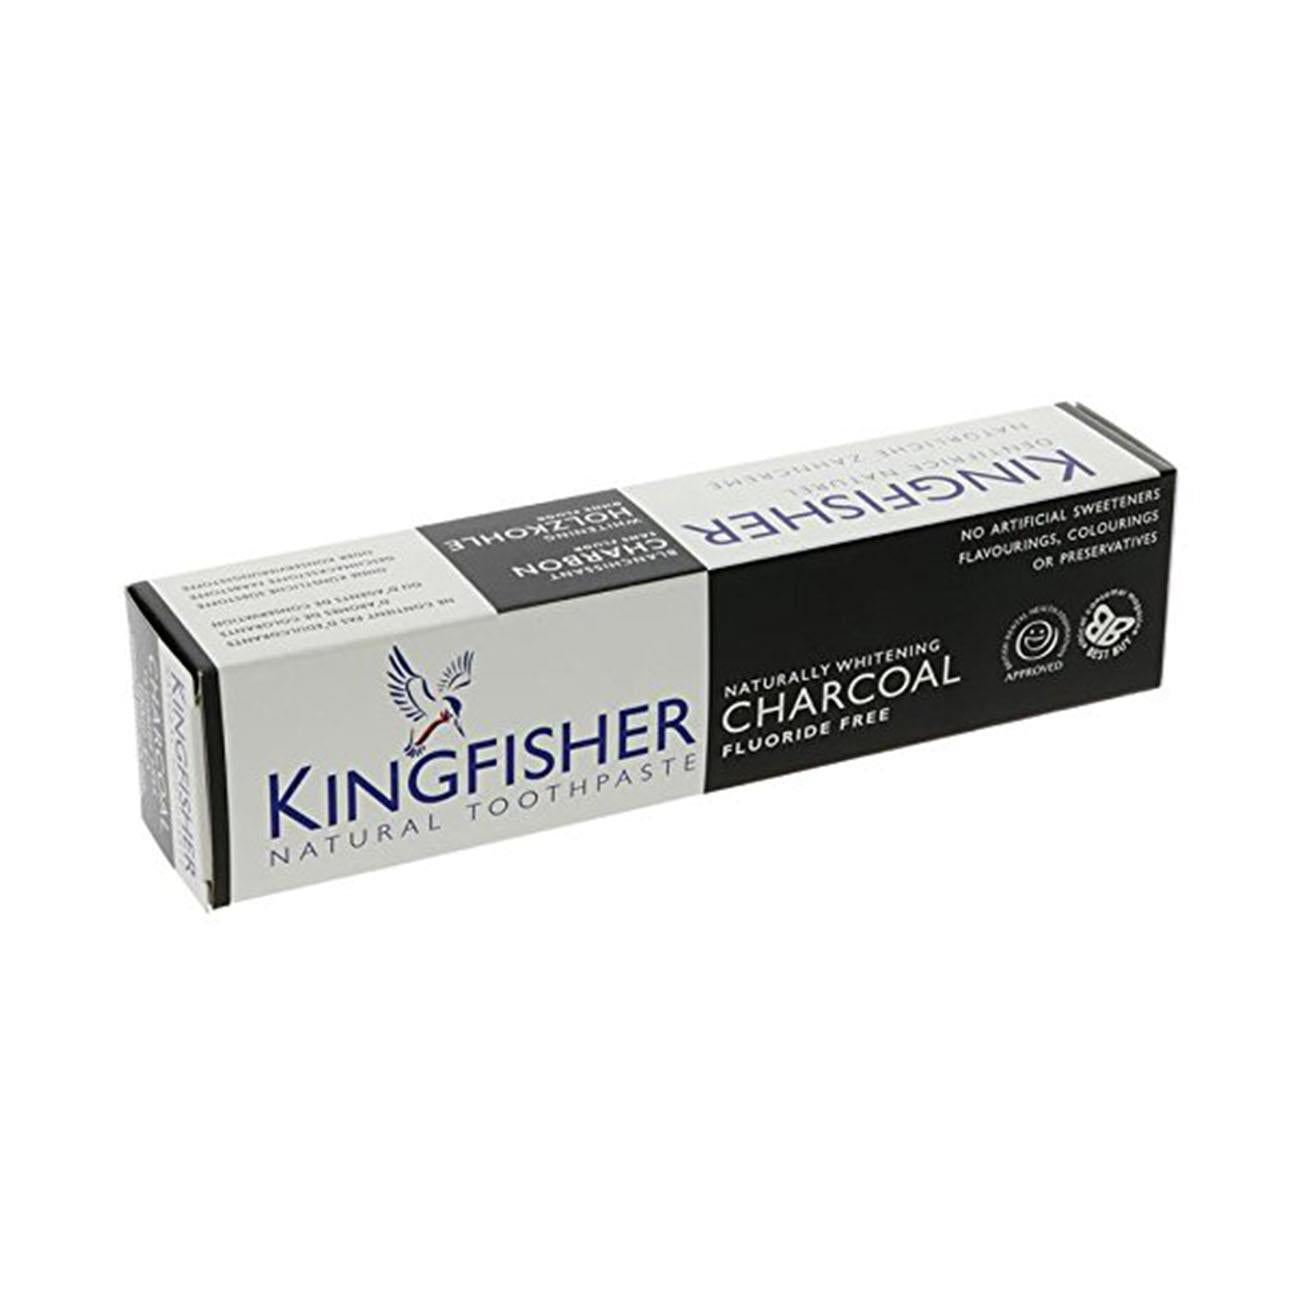 Kingfisher Natural Charcoal Toothpaste 100ml